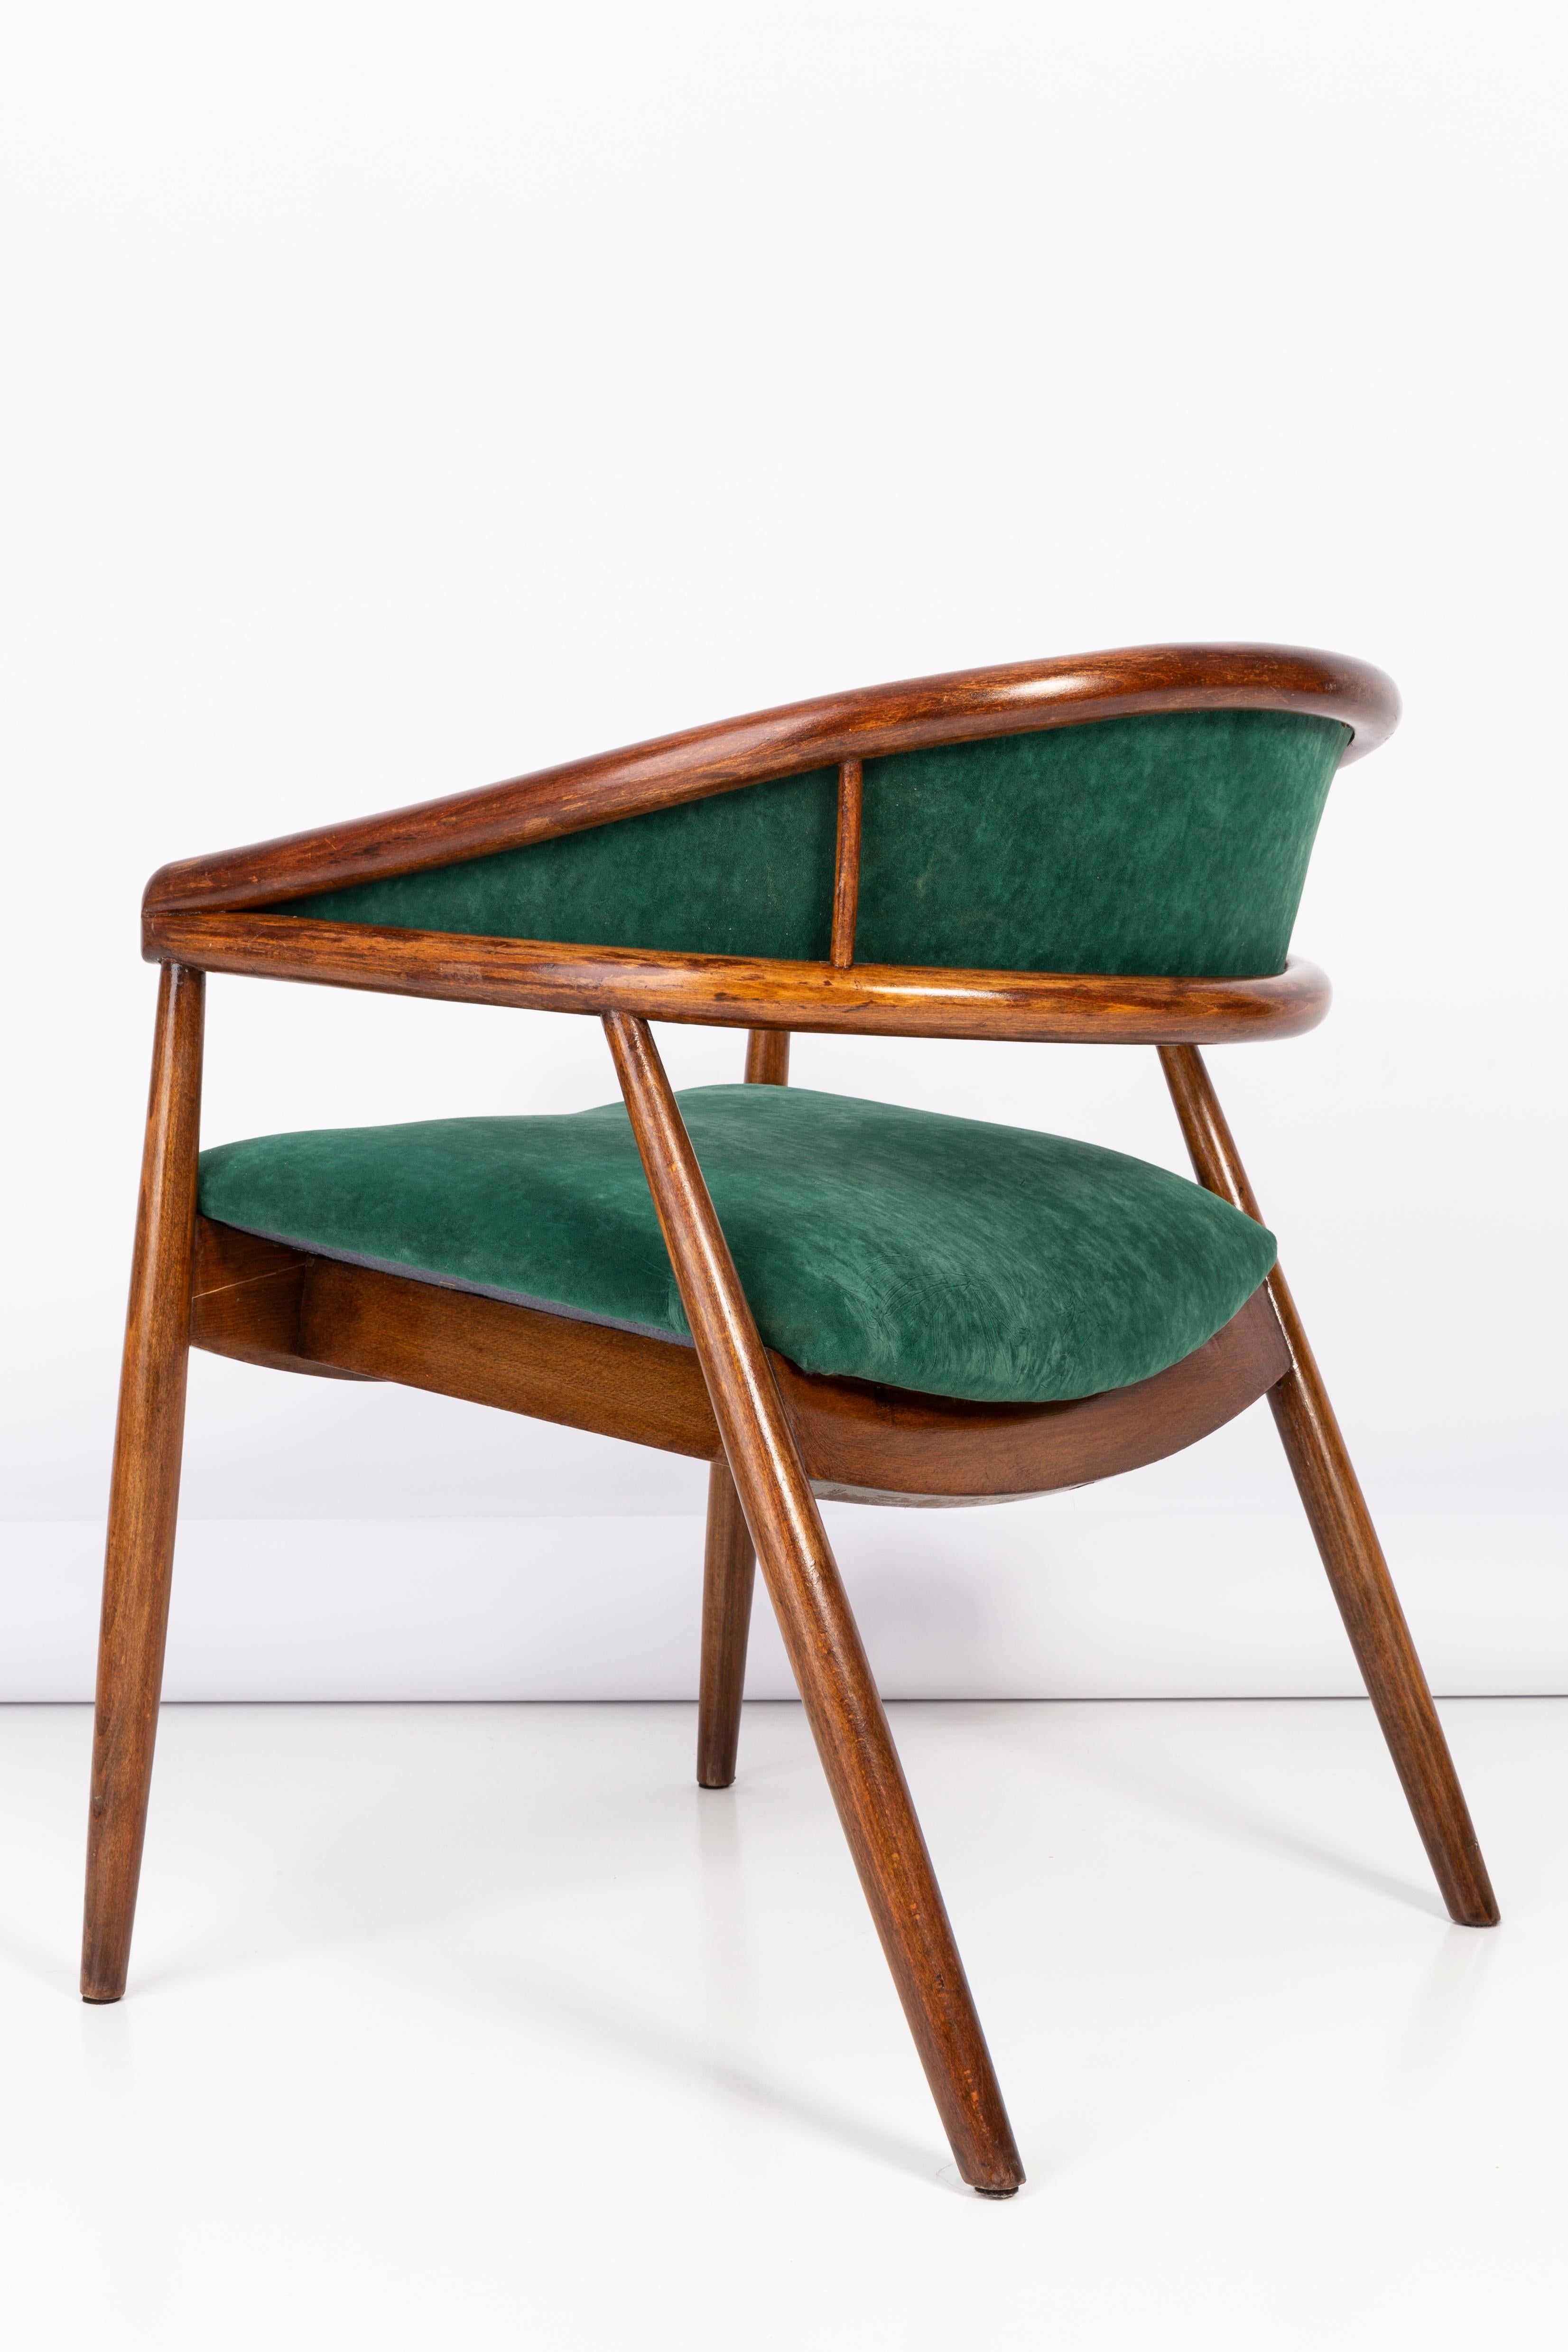 Set of Two James Mont Bent Beech Armchairs, Dark Green, B-3300 Type, 1960s For Sale 4